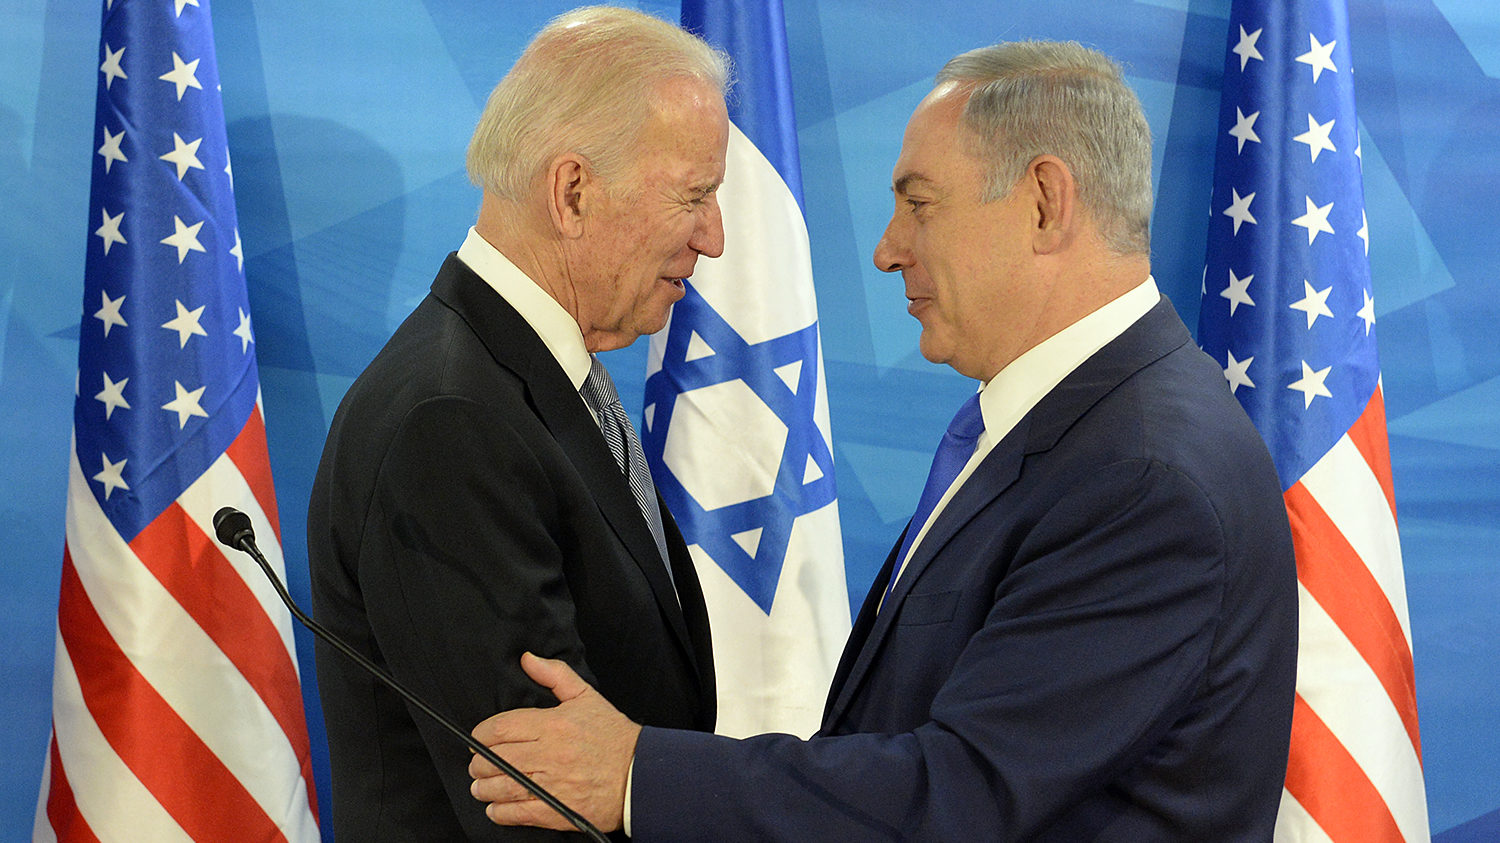 With New Resident in the White House, These Israeli Elections Will Be Different